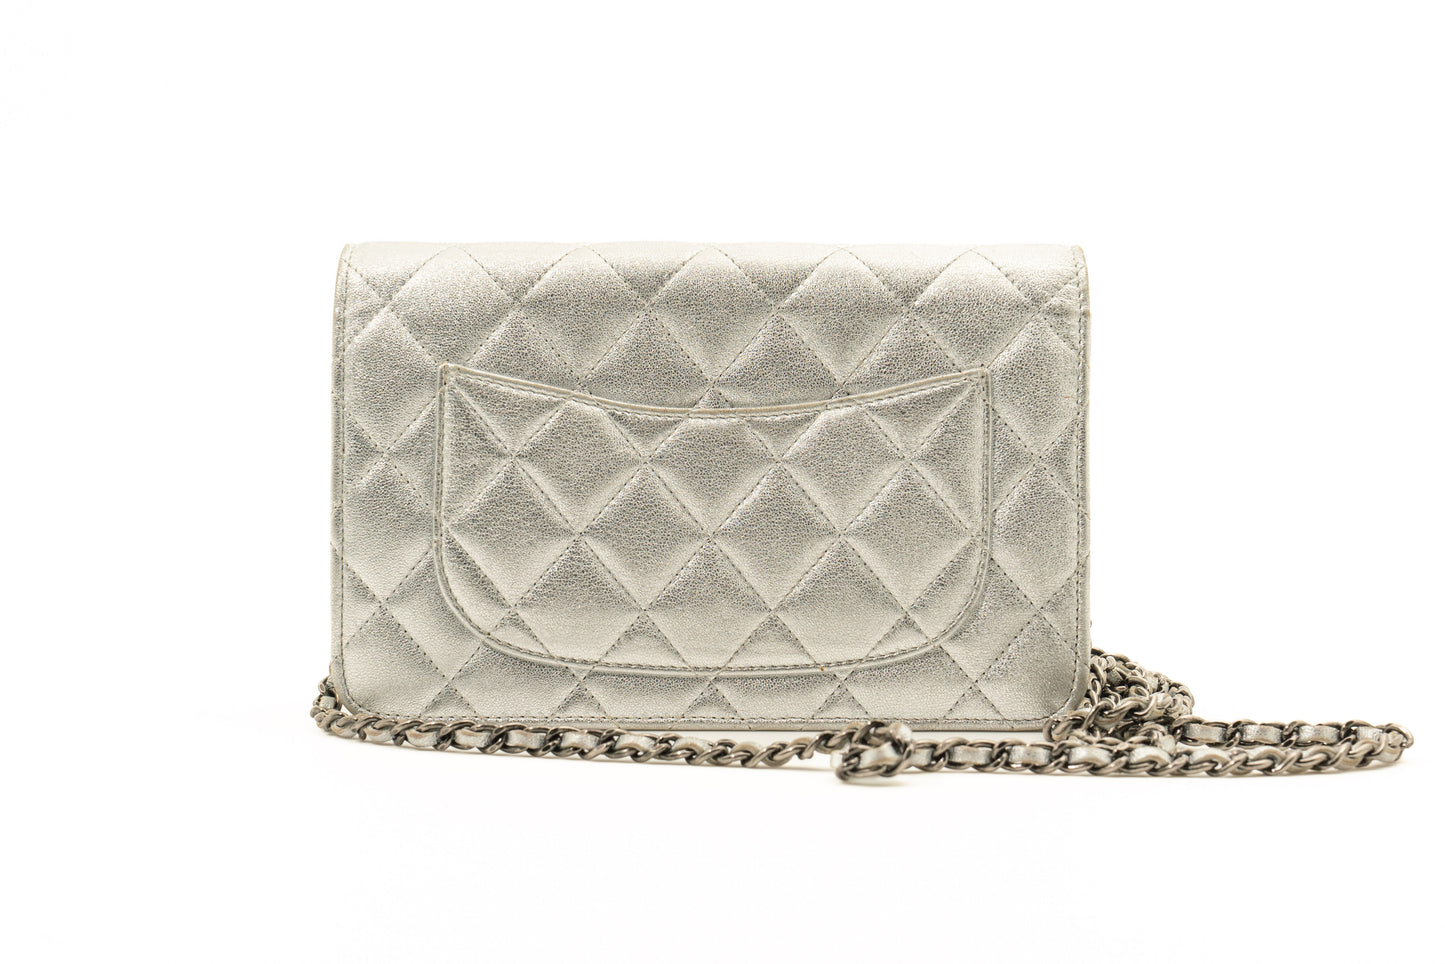 Chanel Lambskin Quilted Wallet On Chain in Silver SHW